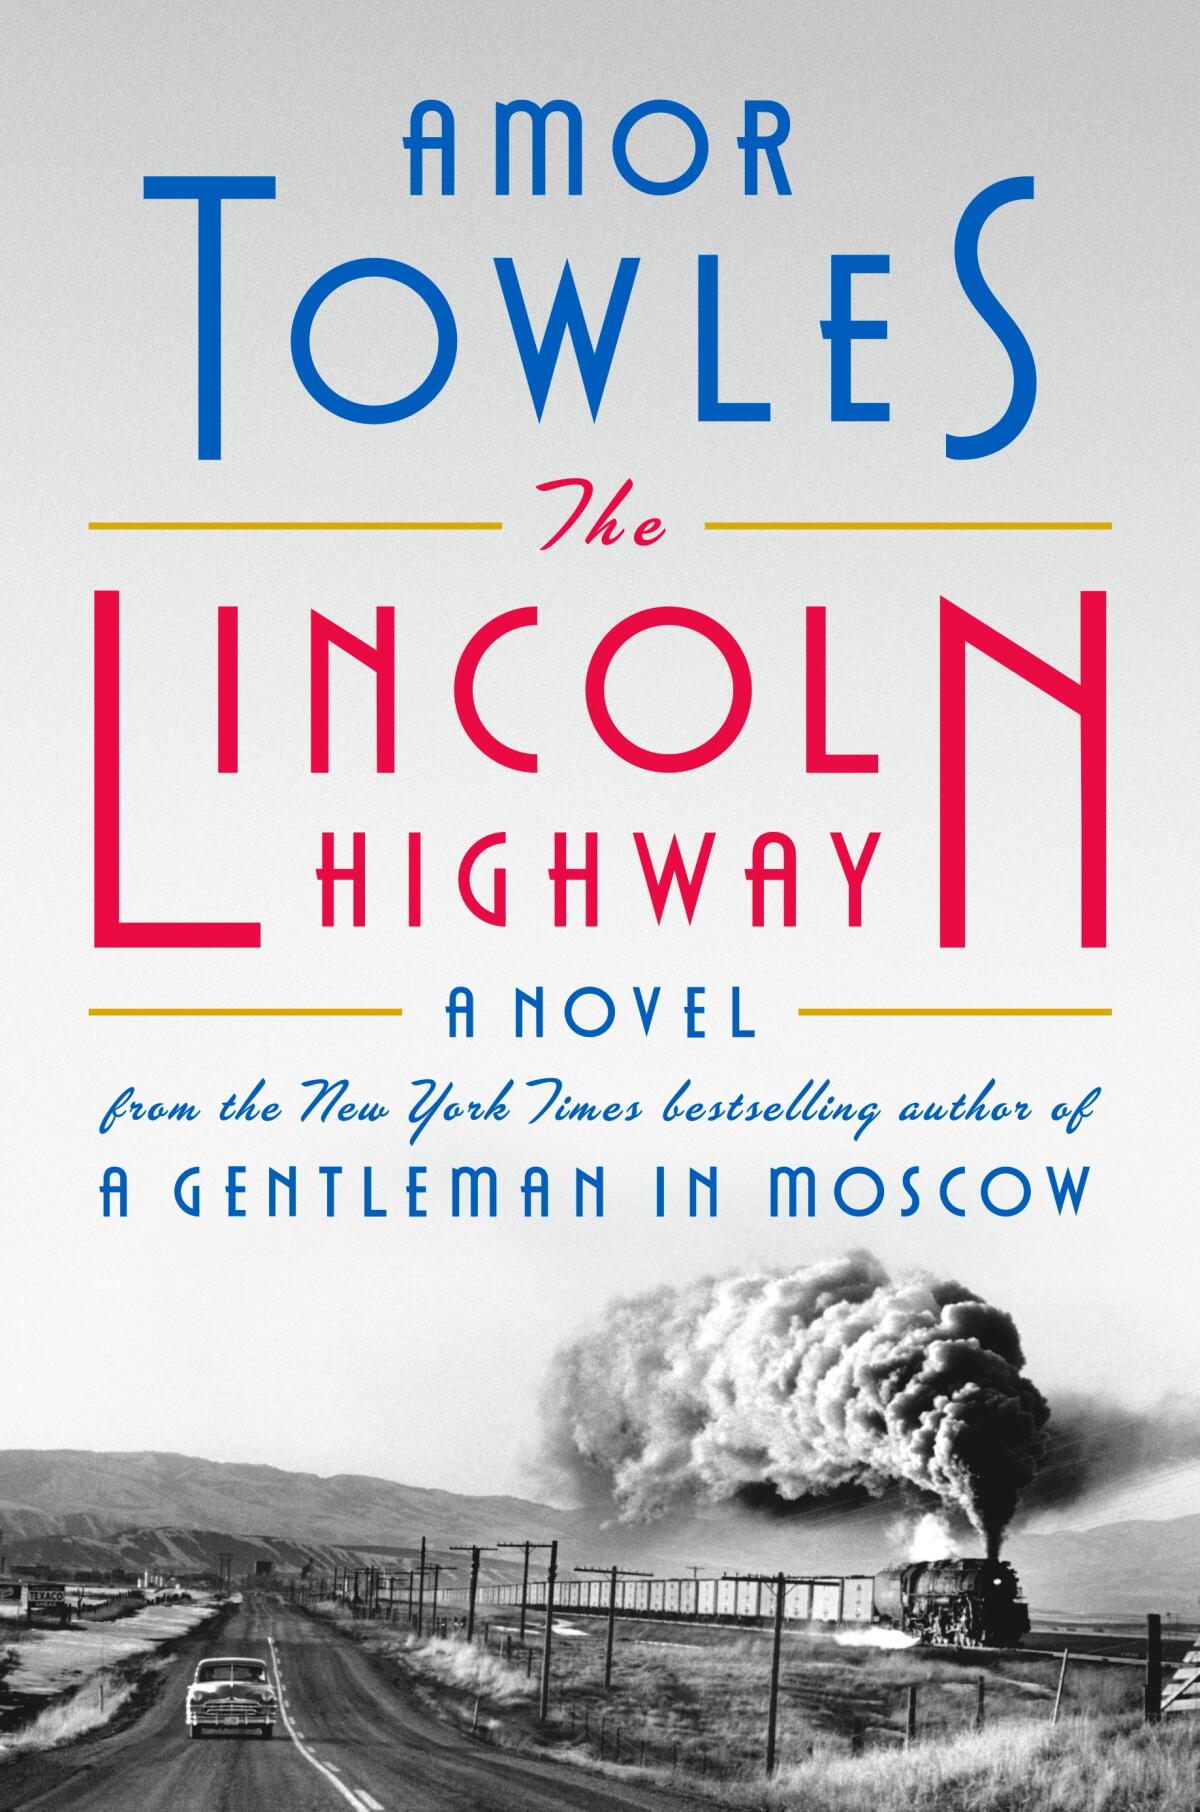 Book jacket for author Amor Towles novel "The Lincoln Highway".